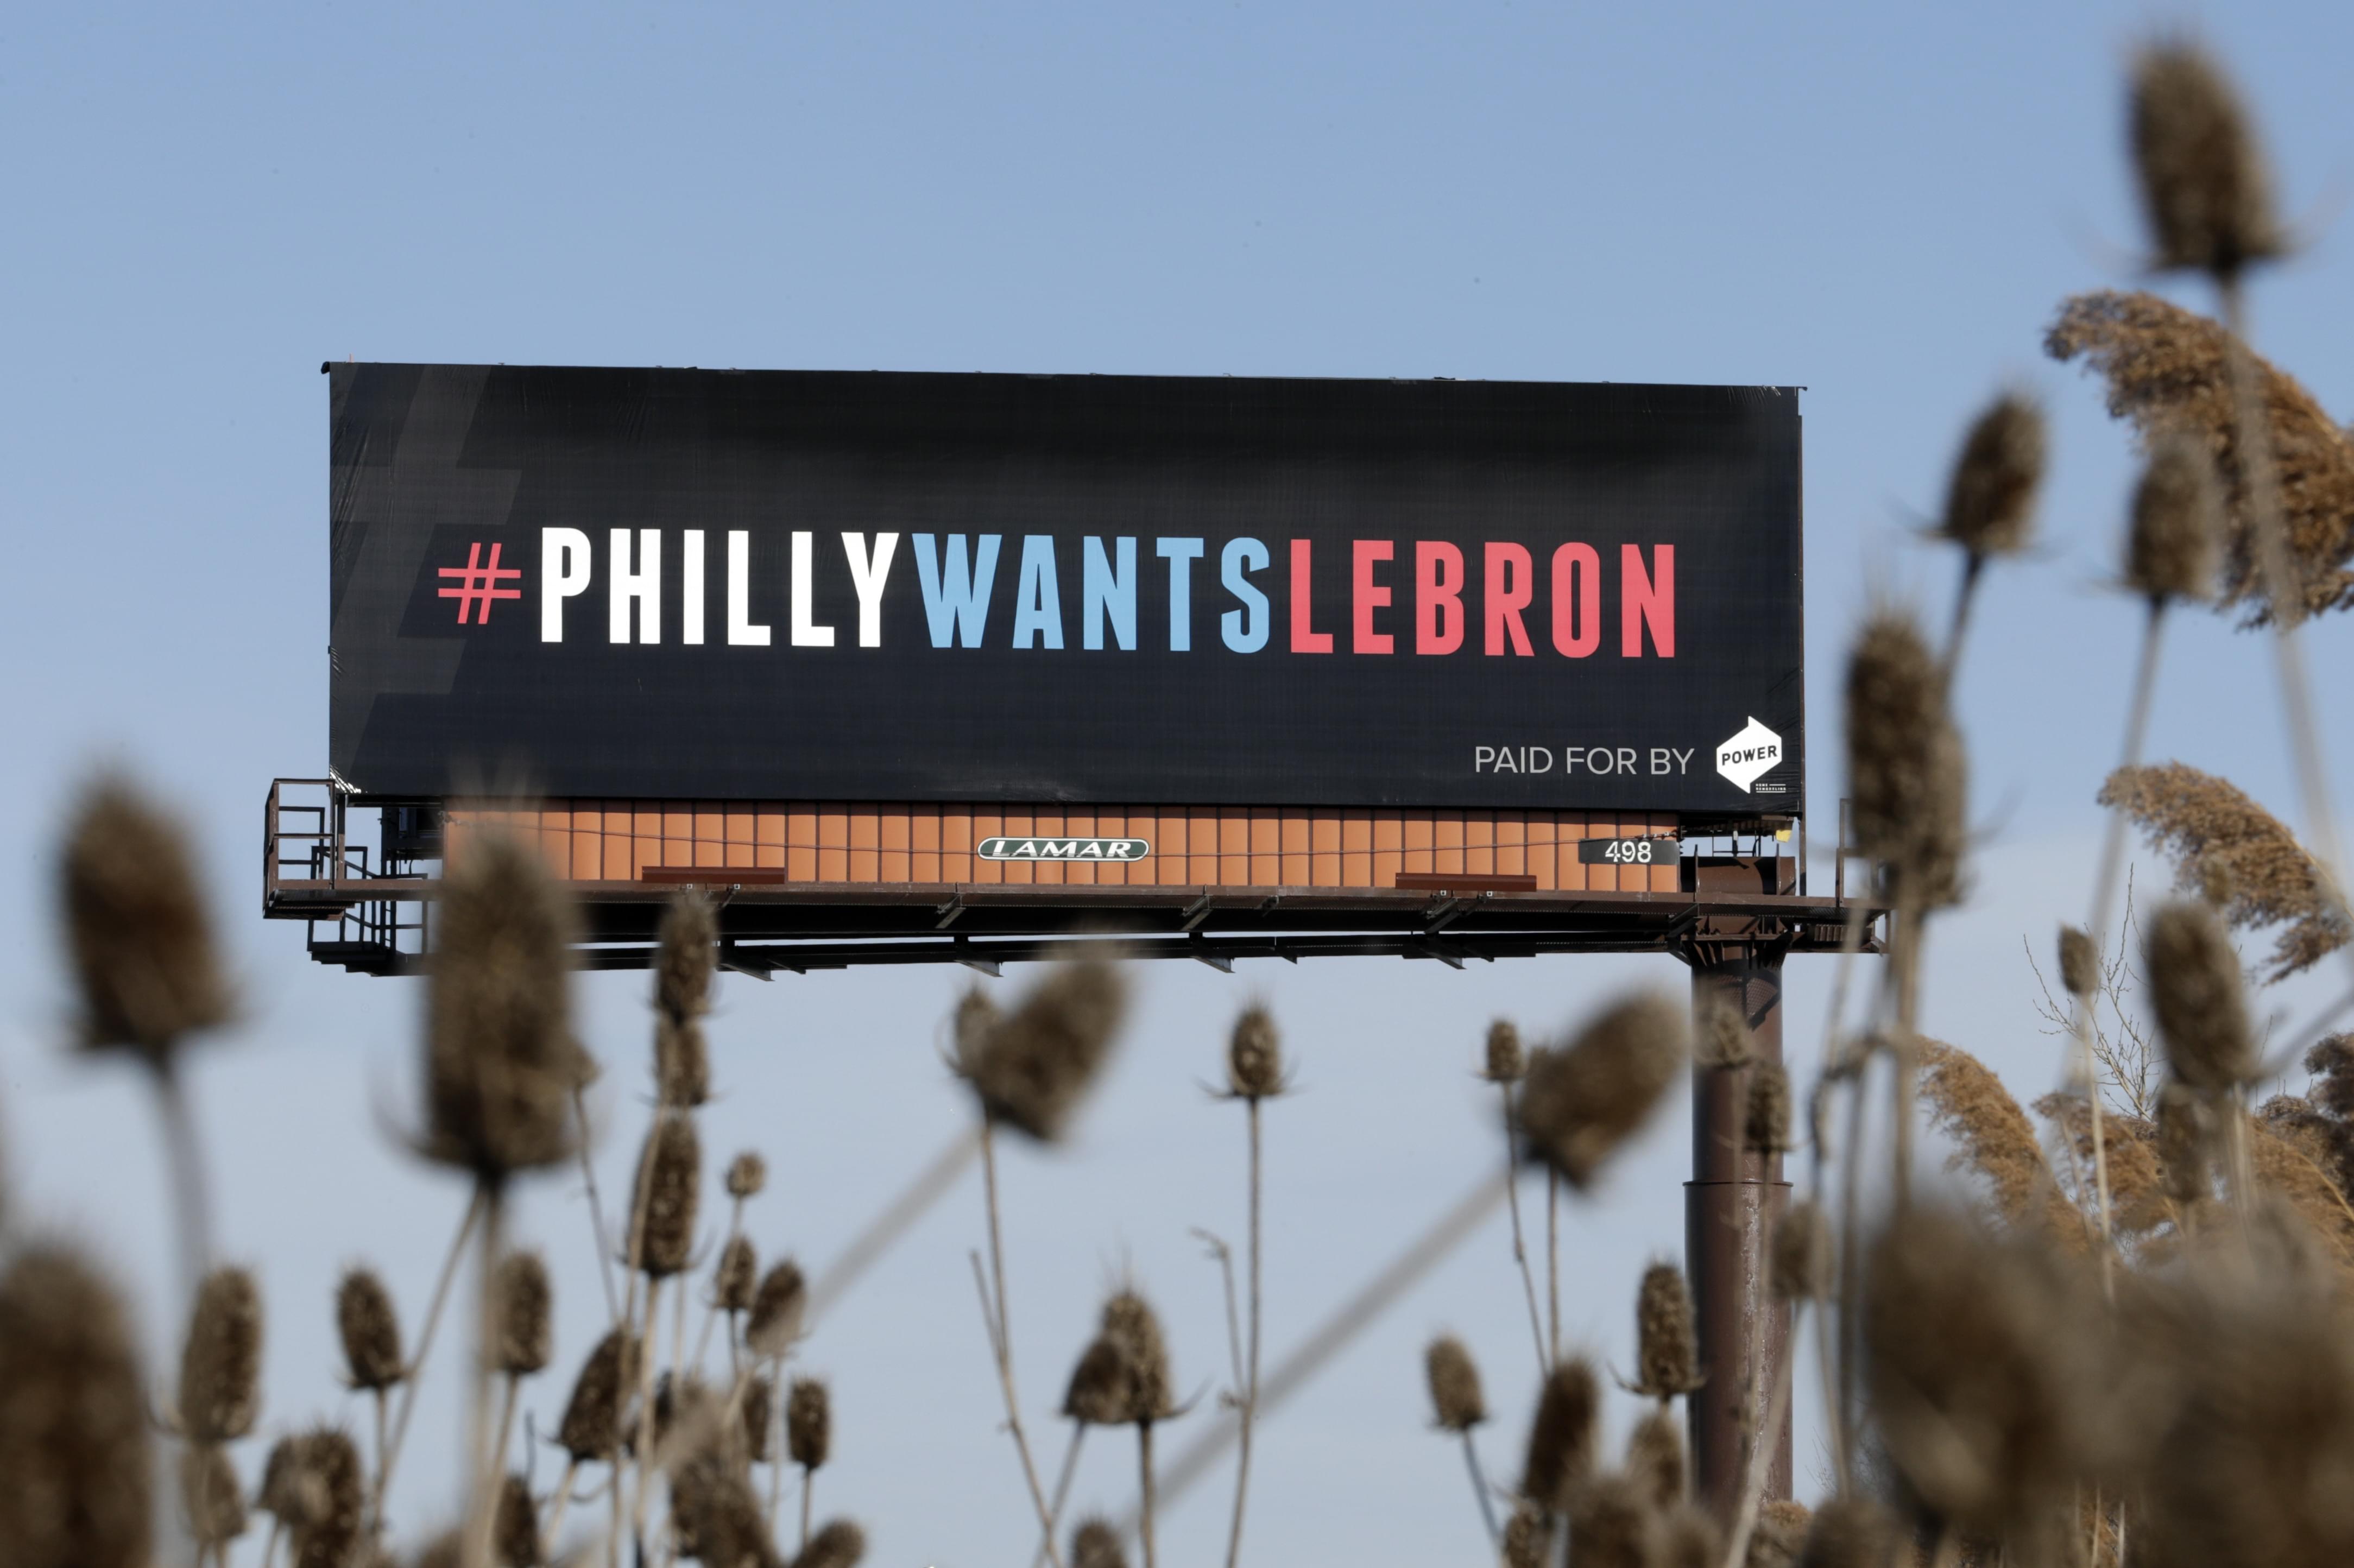 Philly wants Lebron AND more billboards